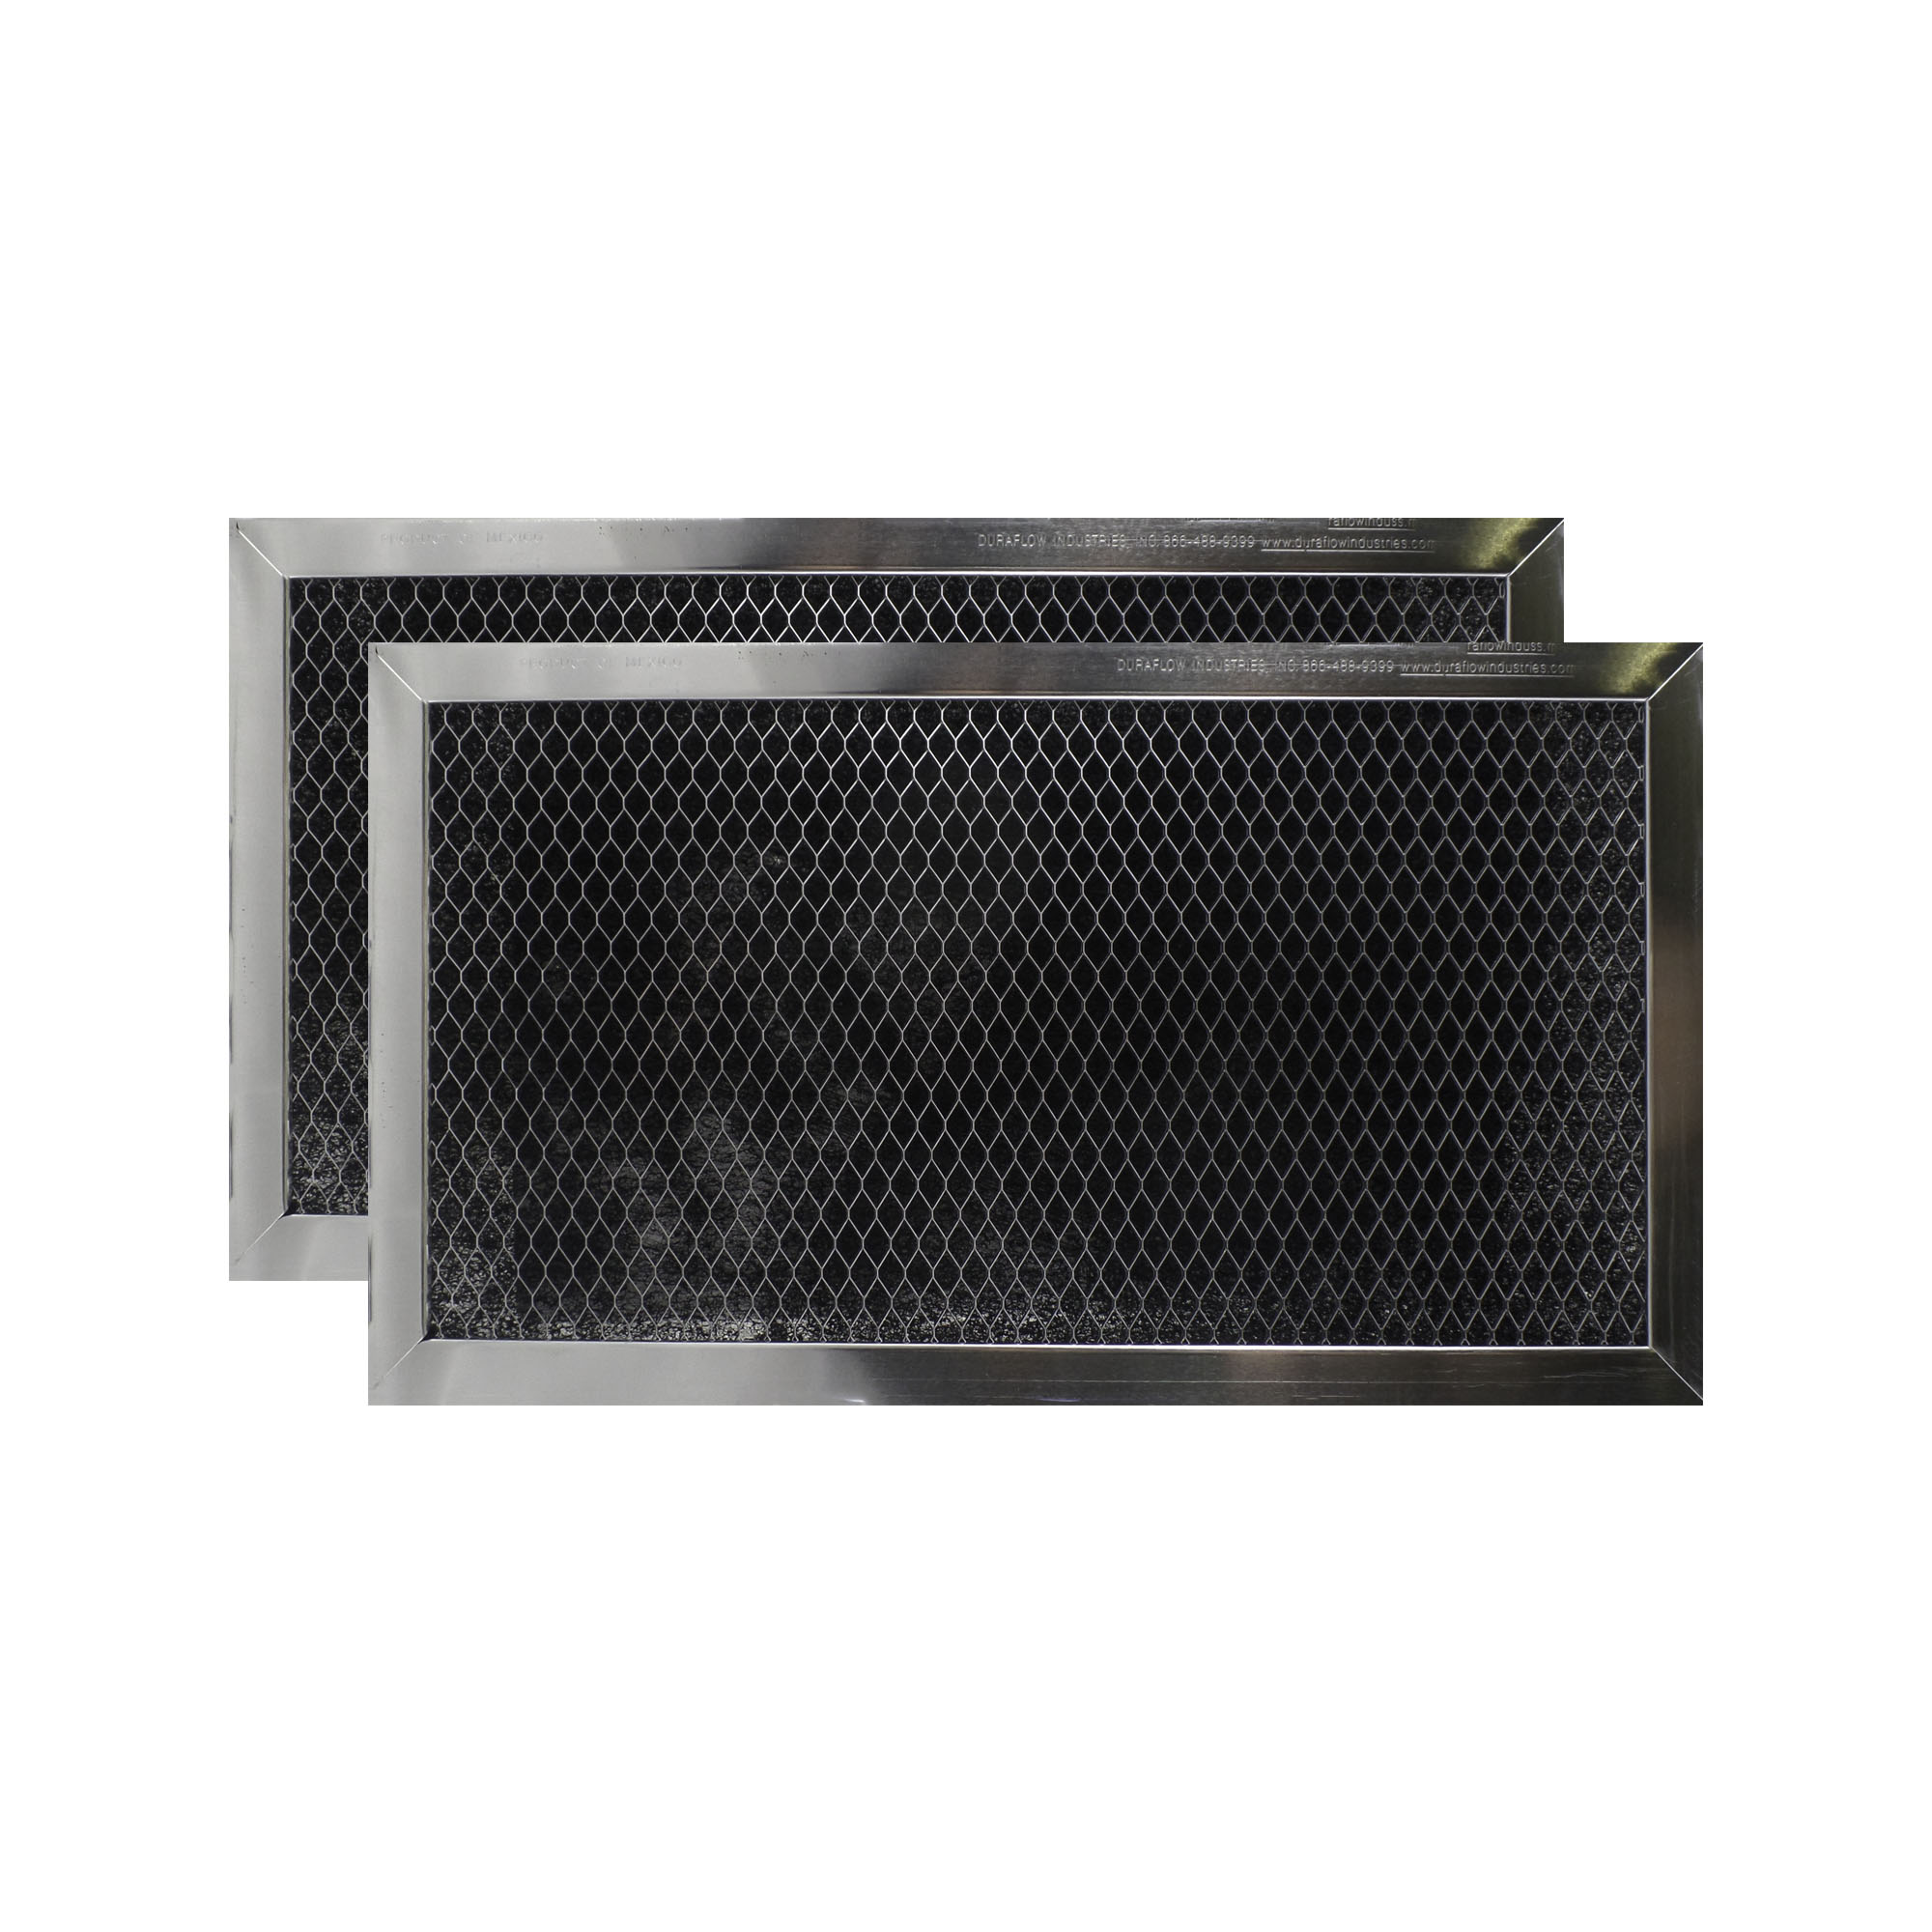 (2 Filters) Compatible For 5304455656 Charcoal Filters - Microwave Oven